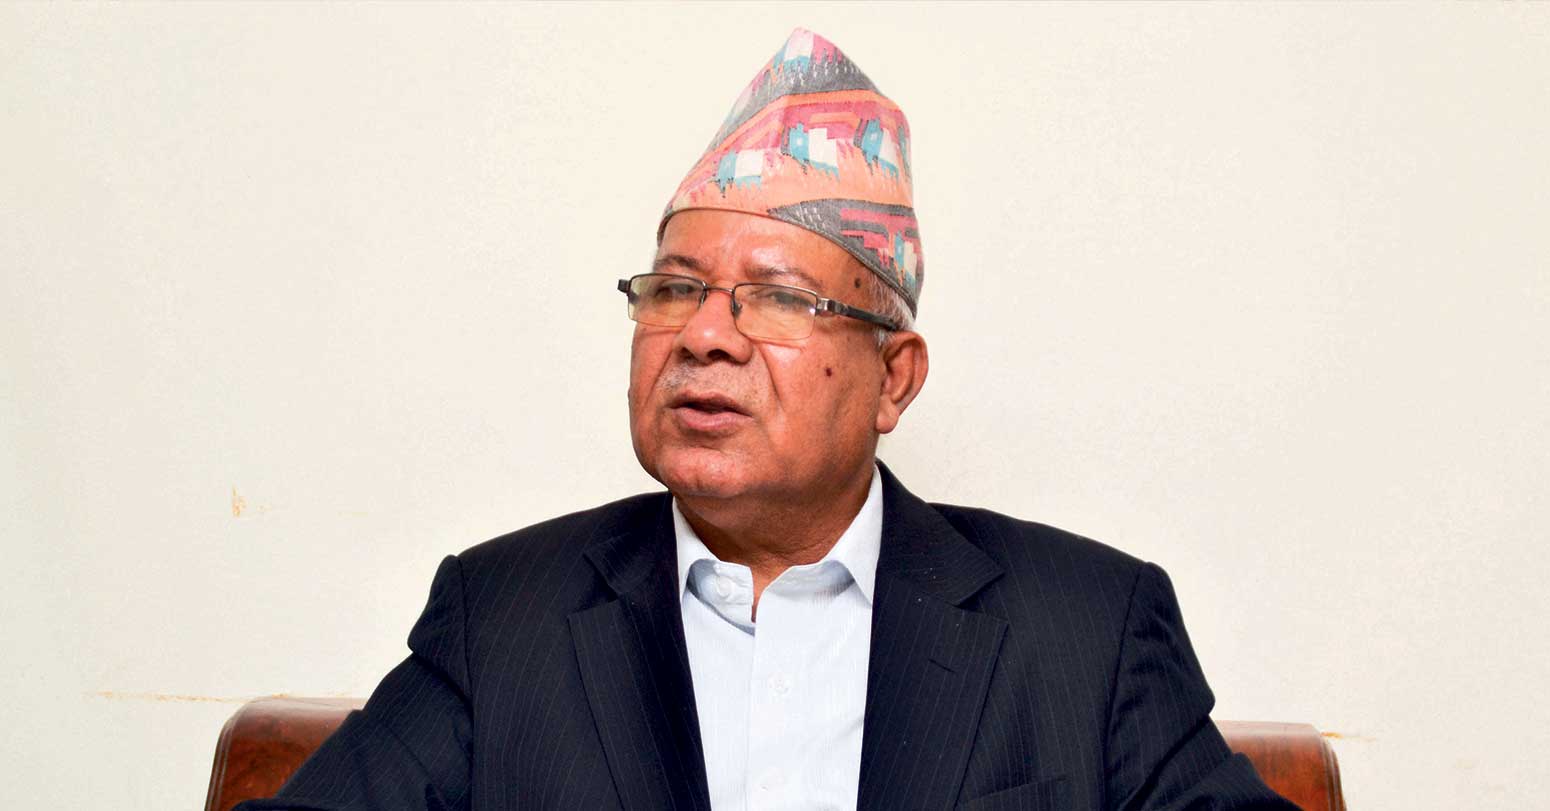 festivals-foster-harmony-unity-chairperson-nepal